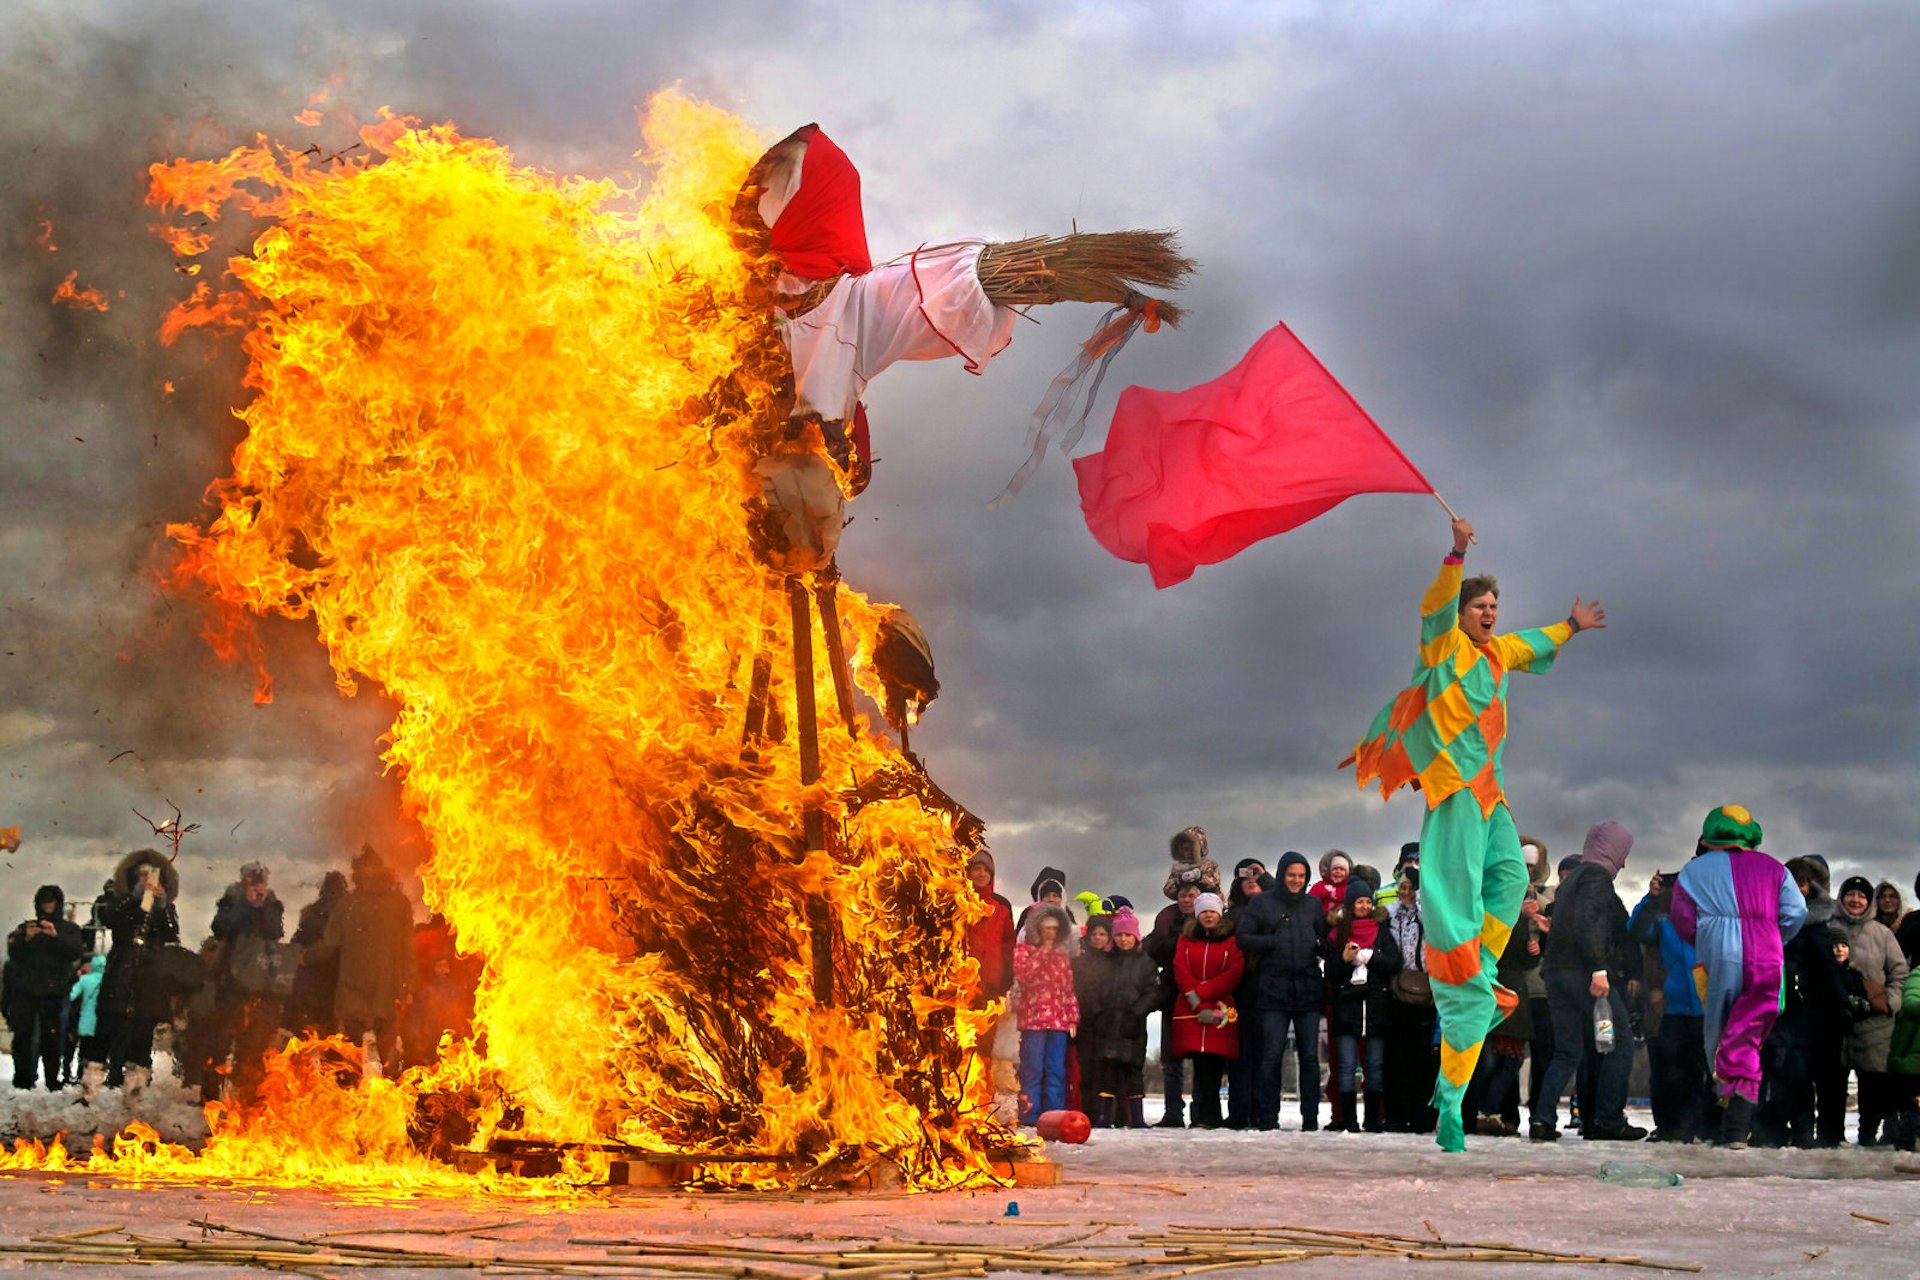 Carnival goers burn dolls to celebrate the arrival of spring as part of Maslenitsa in Russia 